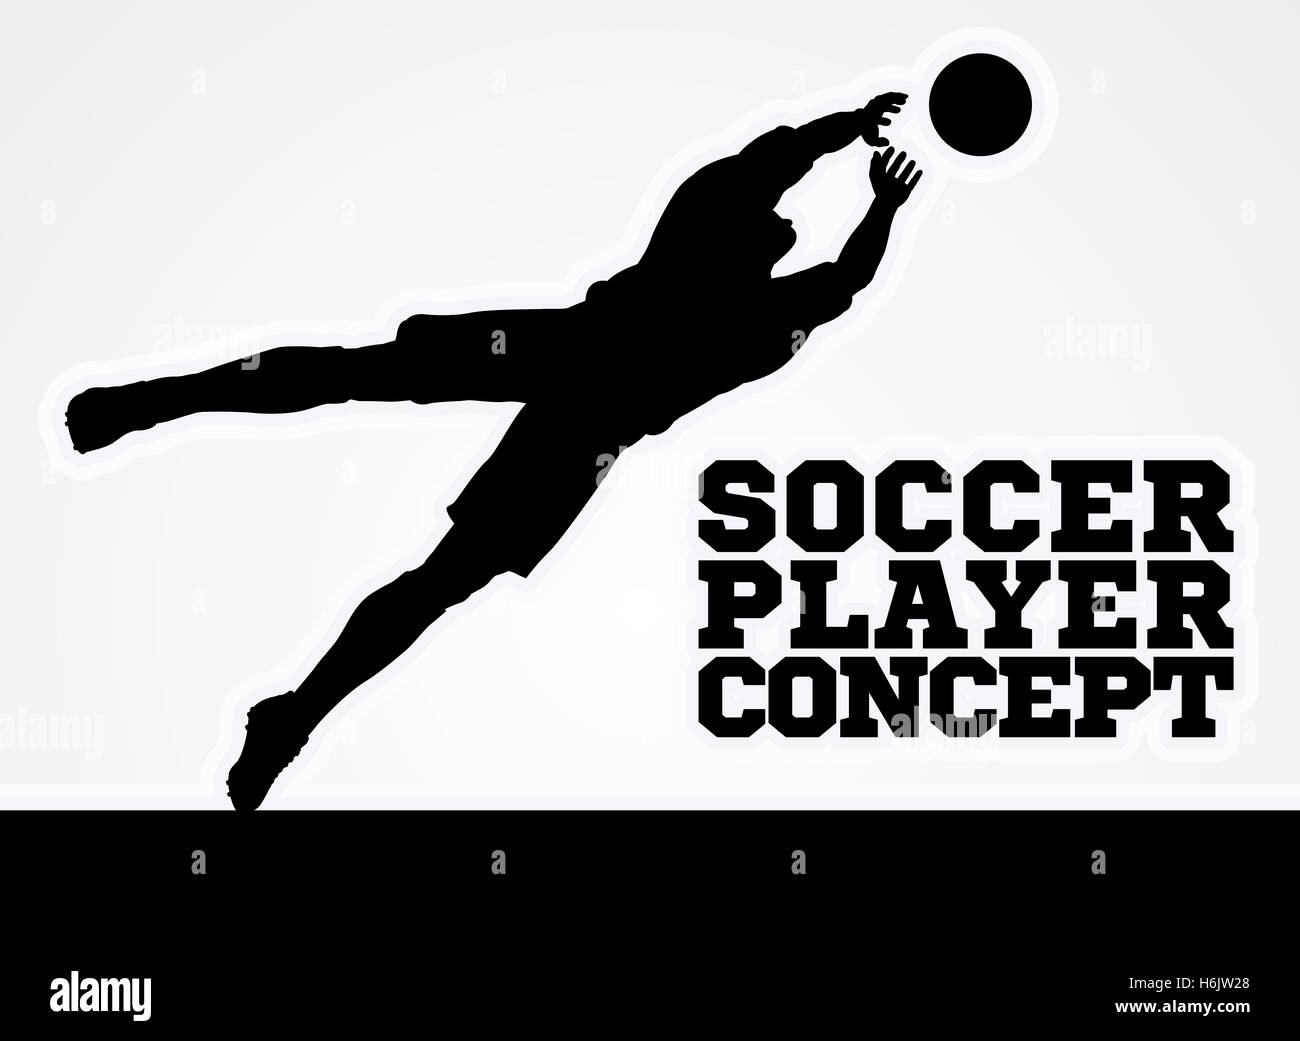 A stylised illustration of a silhouette soccer football player keeper saving a goal diving catching the ball Stock Photo